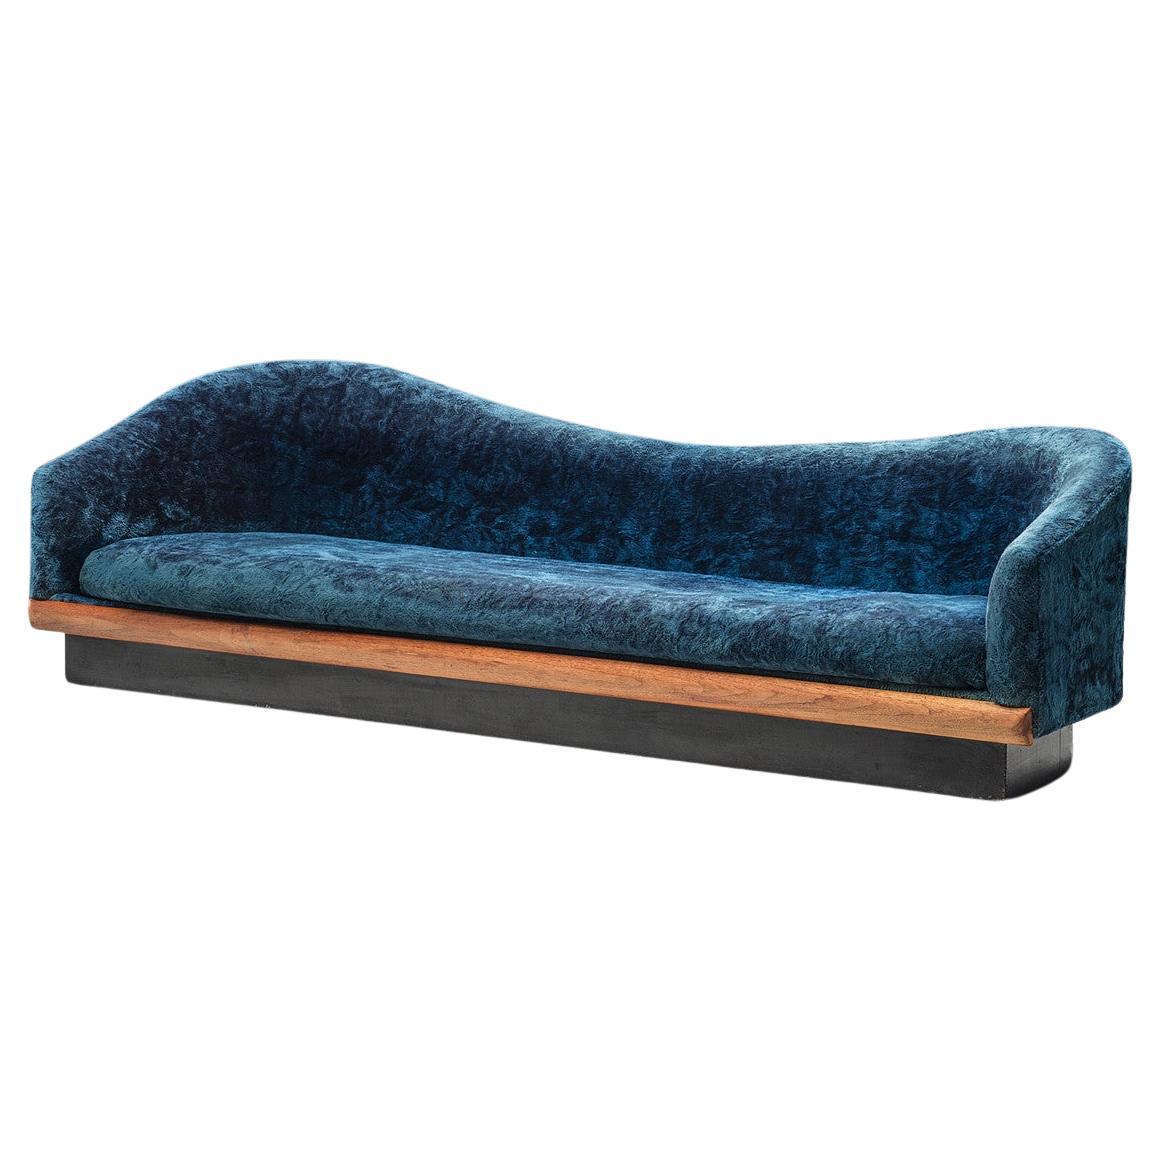 Adrian Pearsall 'Cloud' Sofa in Walnut and Sea Blue Upholstery